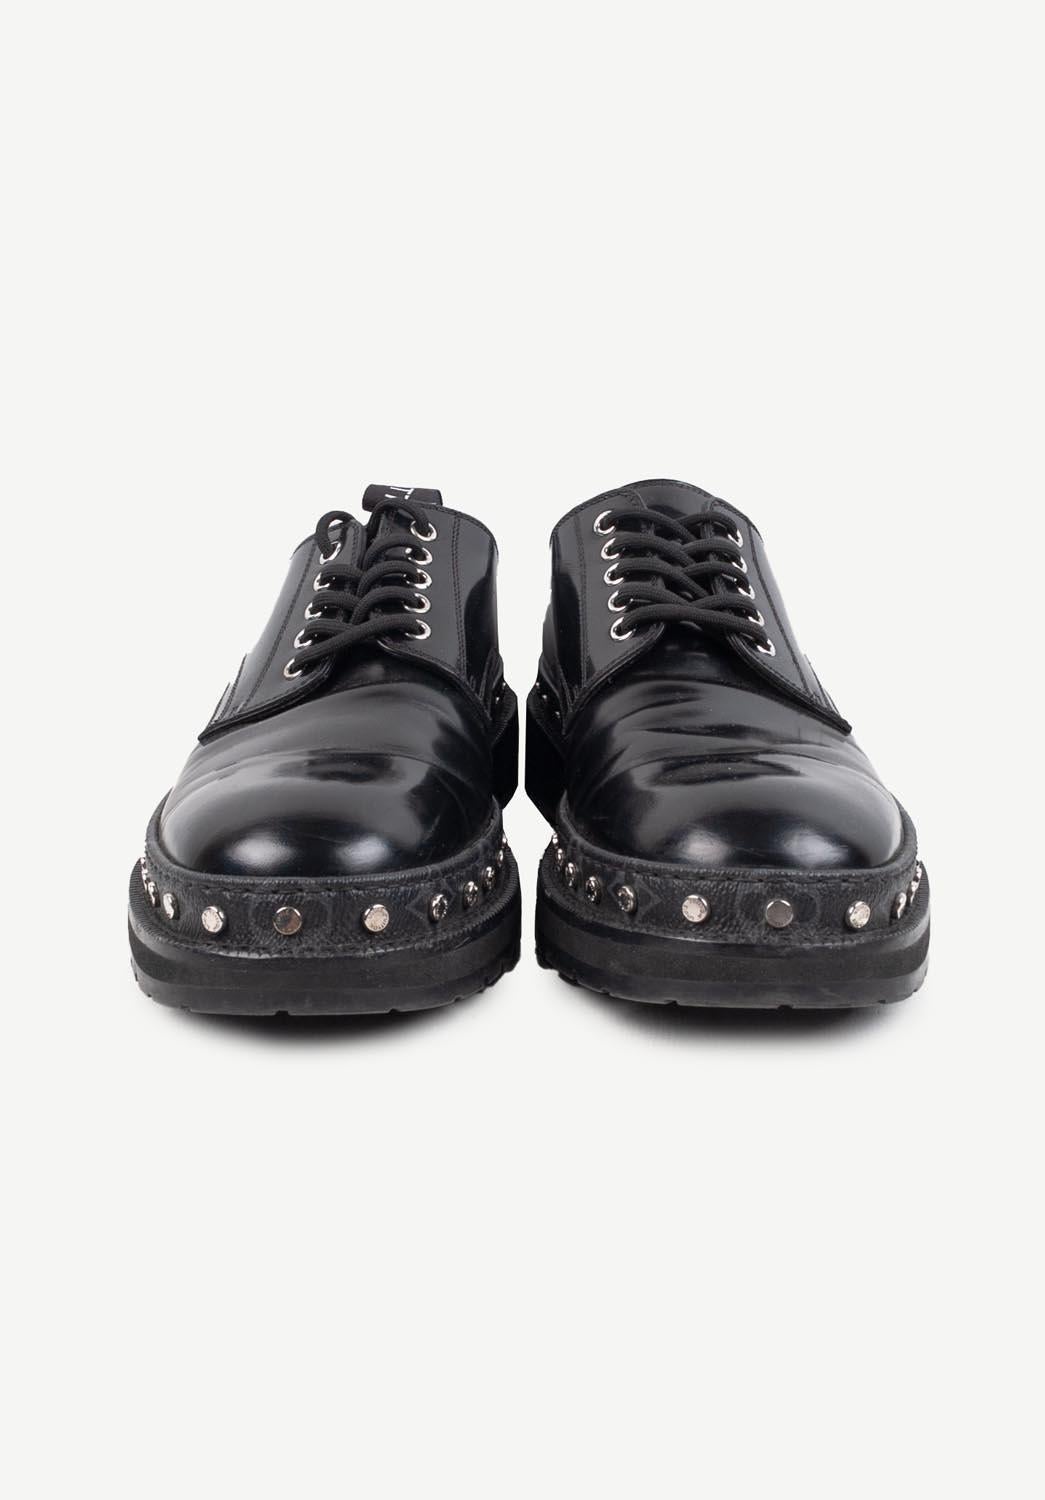 Item for sale is 100% genuine Louis Vuitton Men Shoes Size 9 S277
Color: Black
(An actual color may a bit vary due to individual computer screen interpretation)
Material: Leather
Tag size: 9, EUR43 
These shoes are great quality item. Rate 9 of 10,